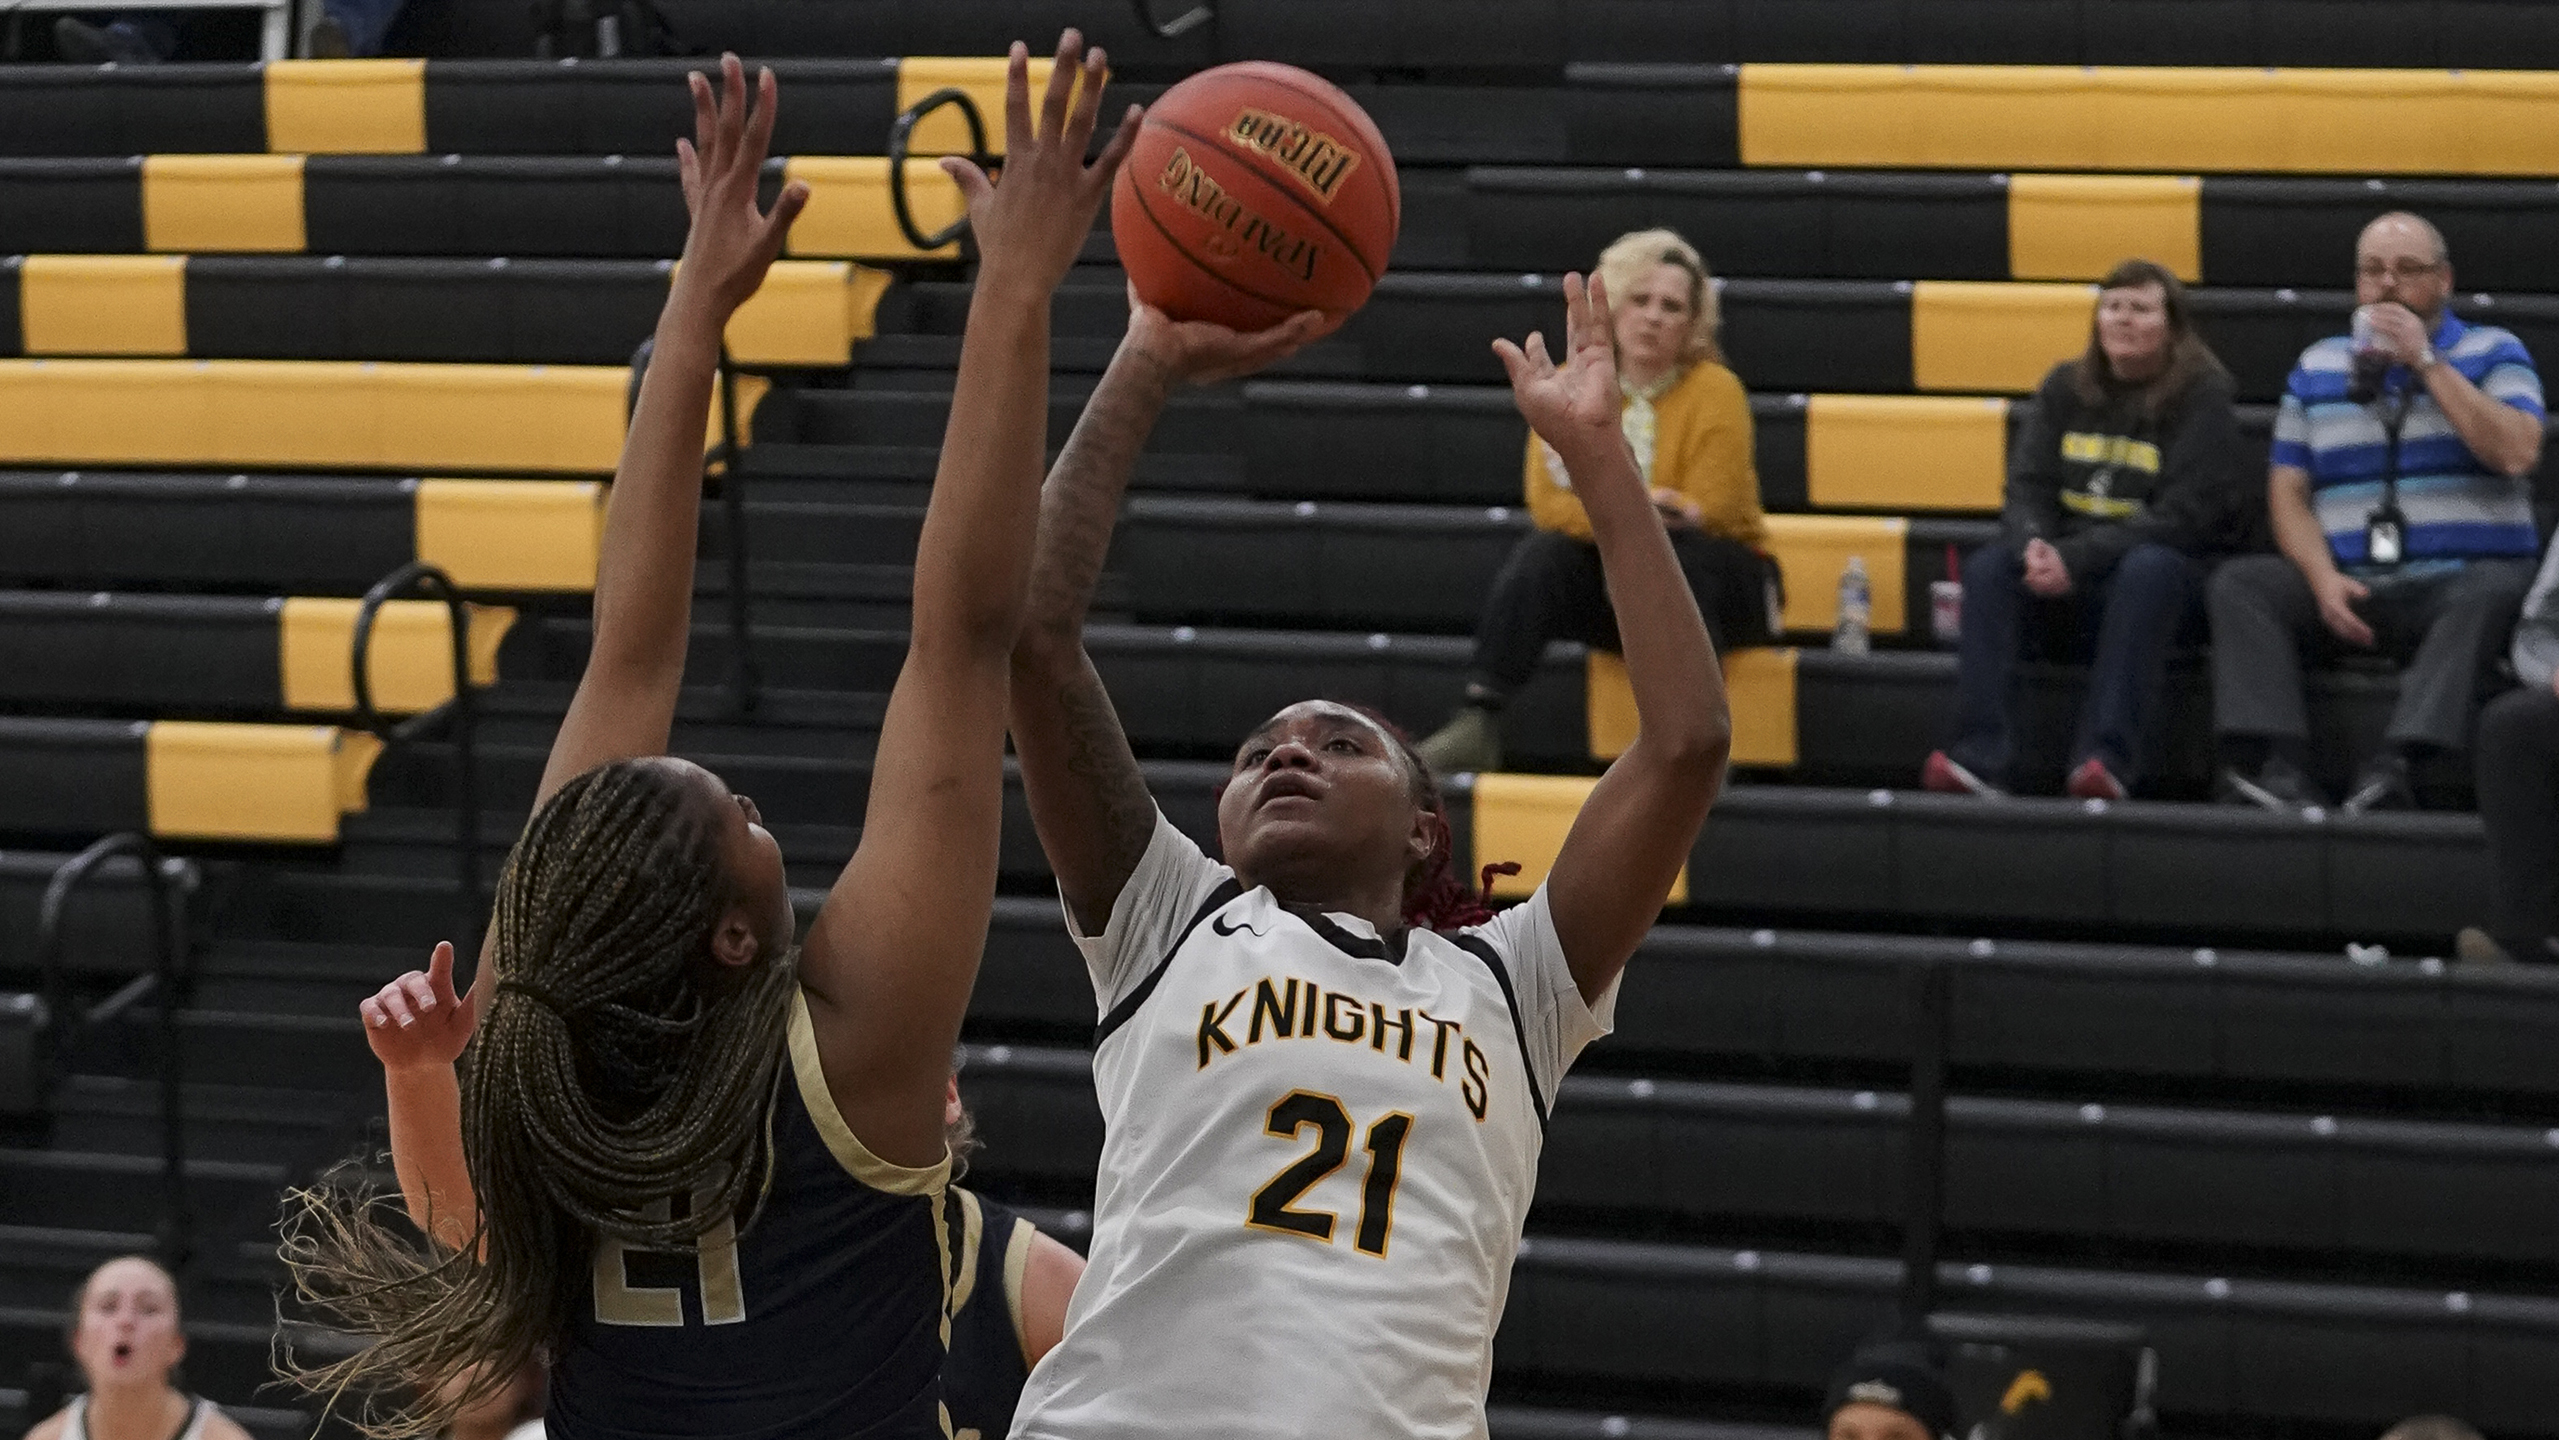 Knights remain undefeated in Region IX play